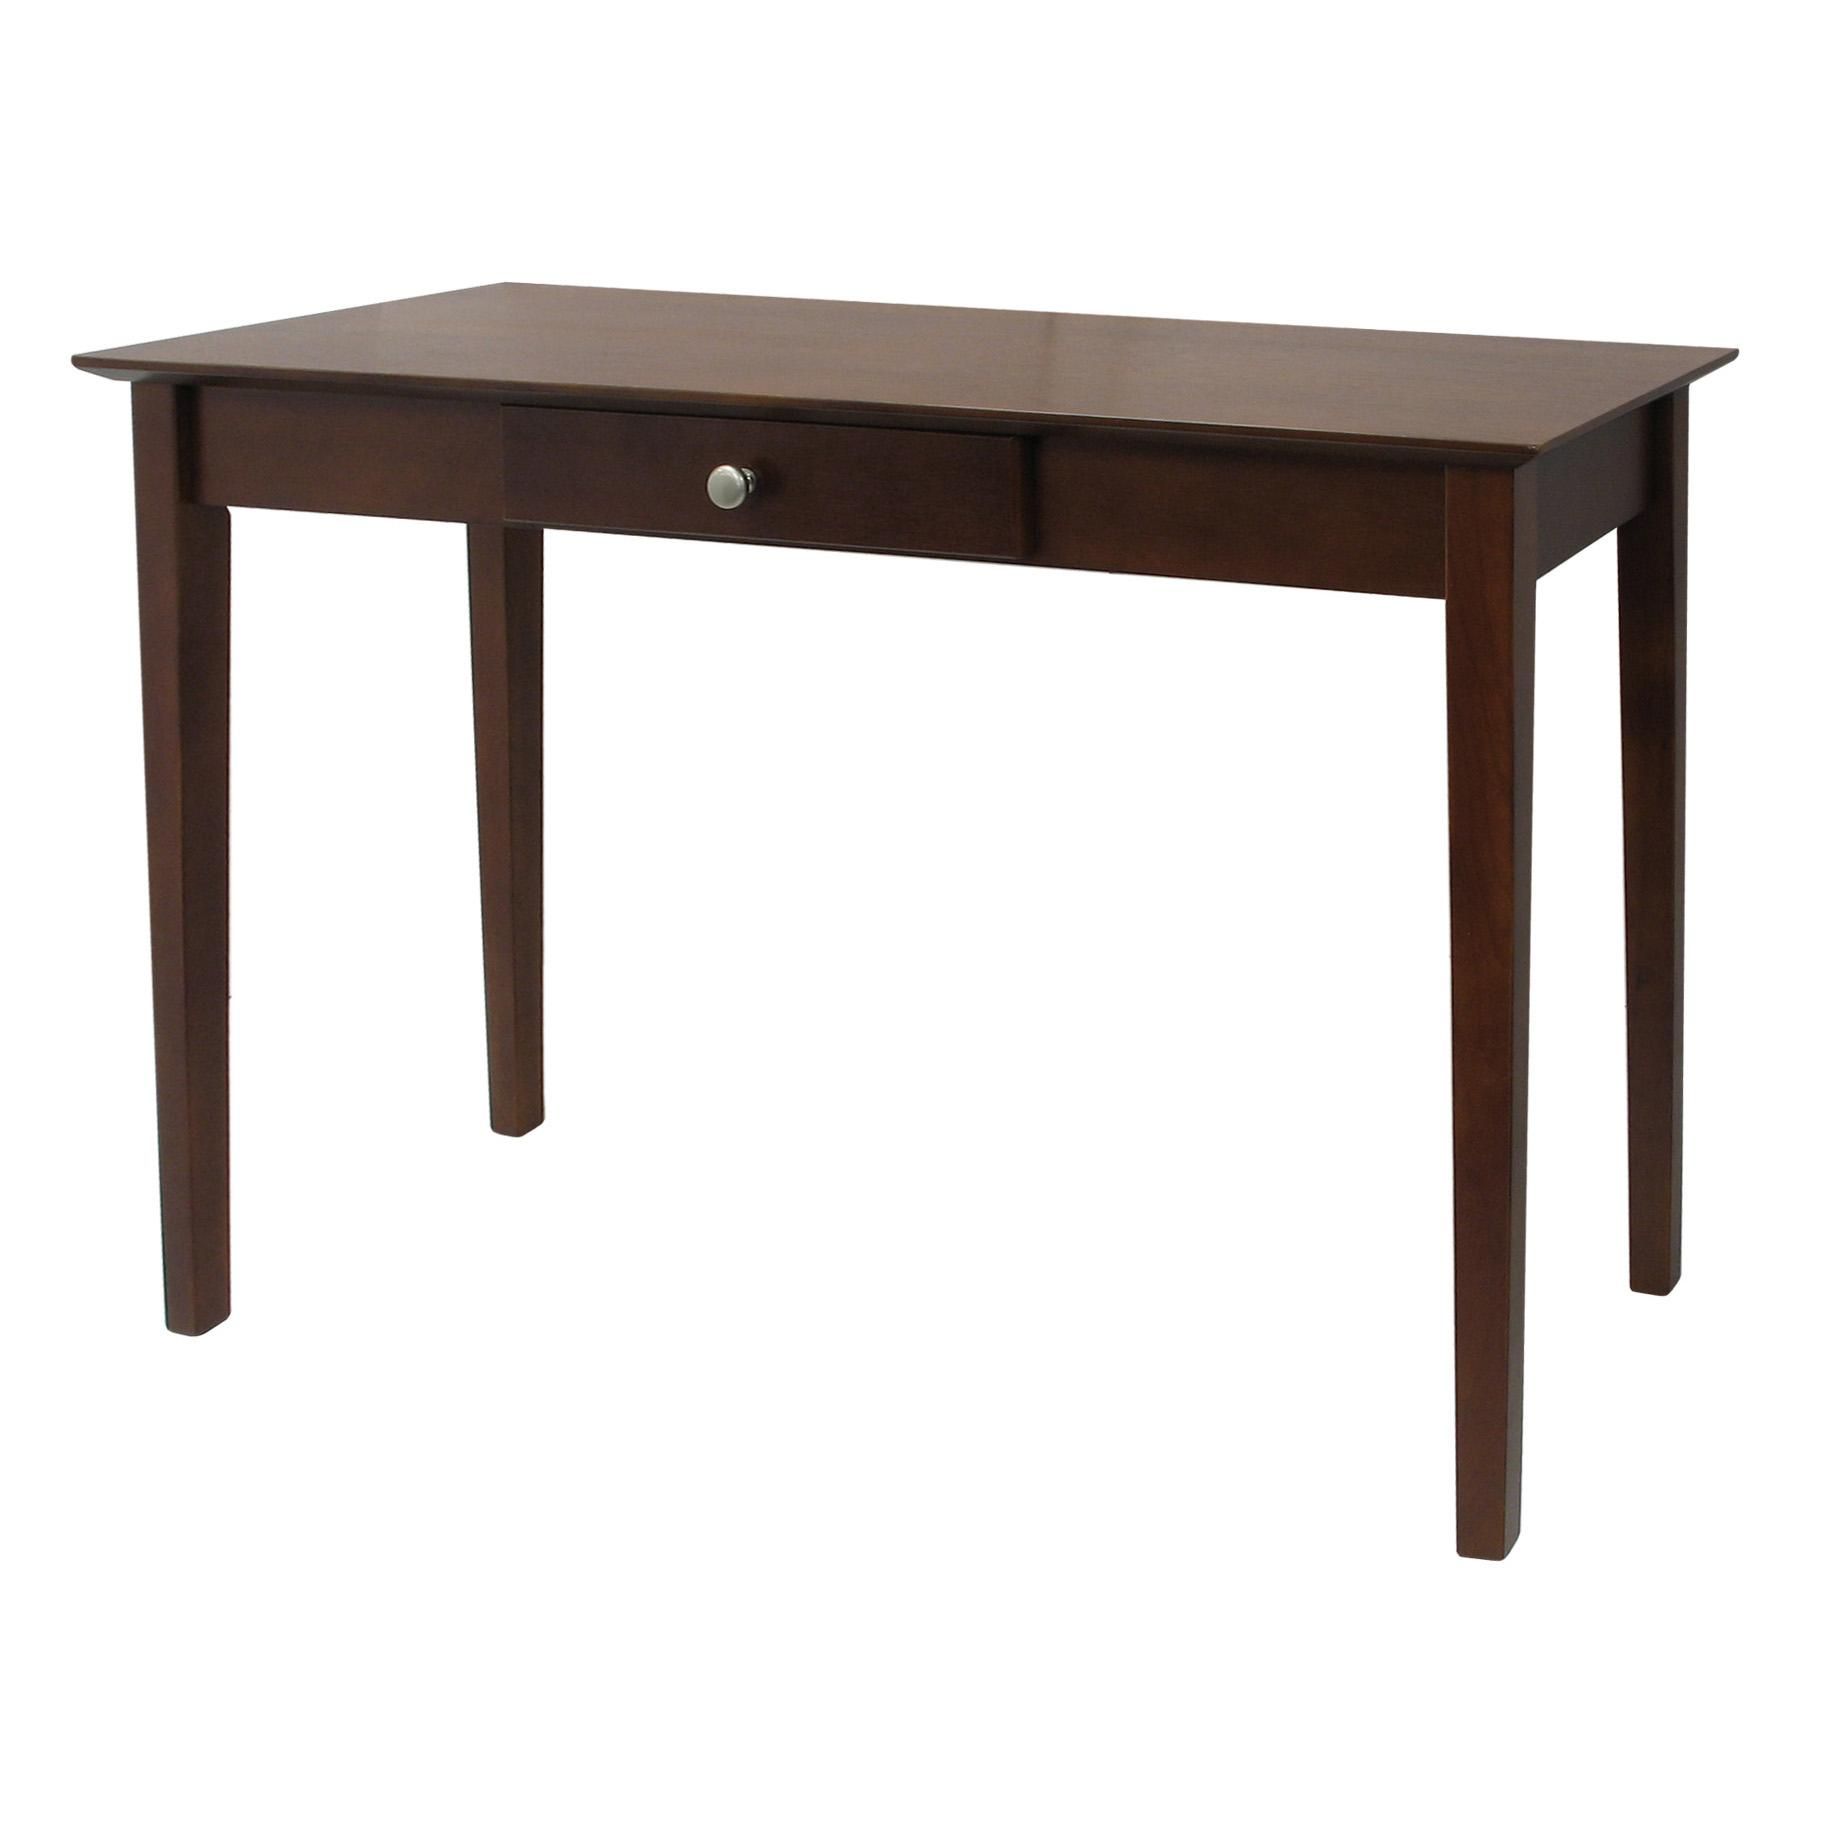 Sofa Table: Luxurious Sofa Table Desk Ideas Console Tables Ikea Pertaining To Parsons Walnut Top &amp; Dark Steel Base 48x16 Console Tables (View 15 of 30)